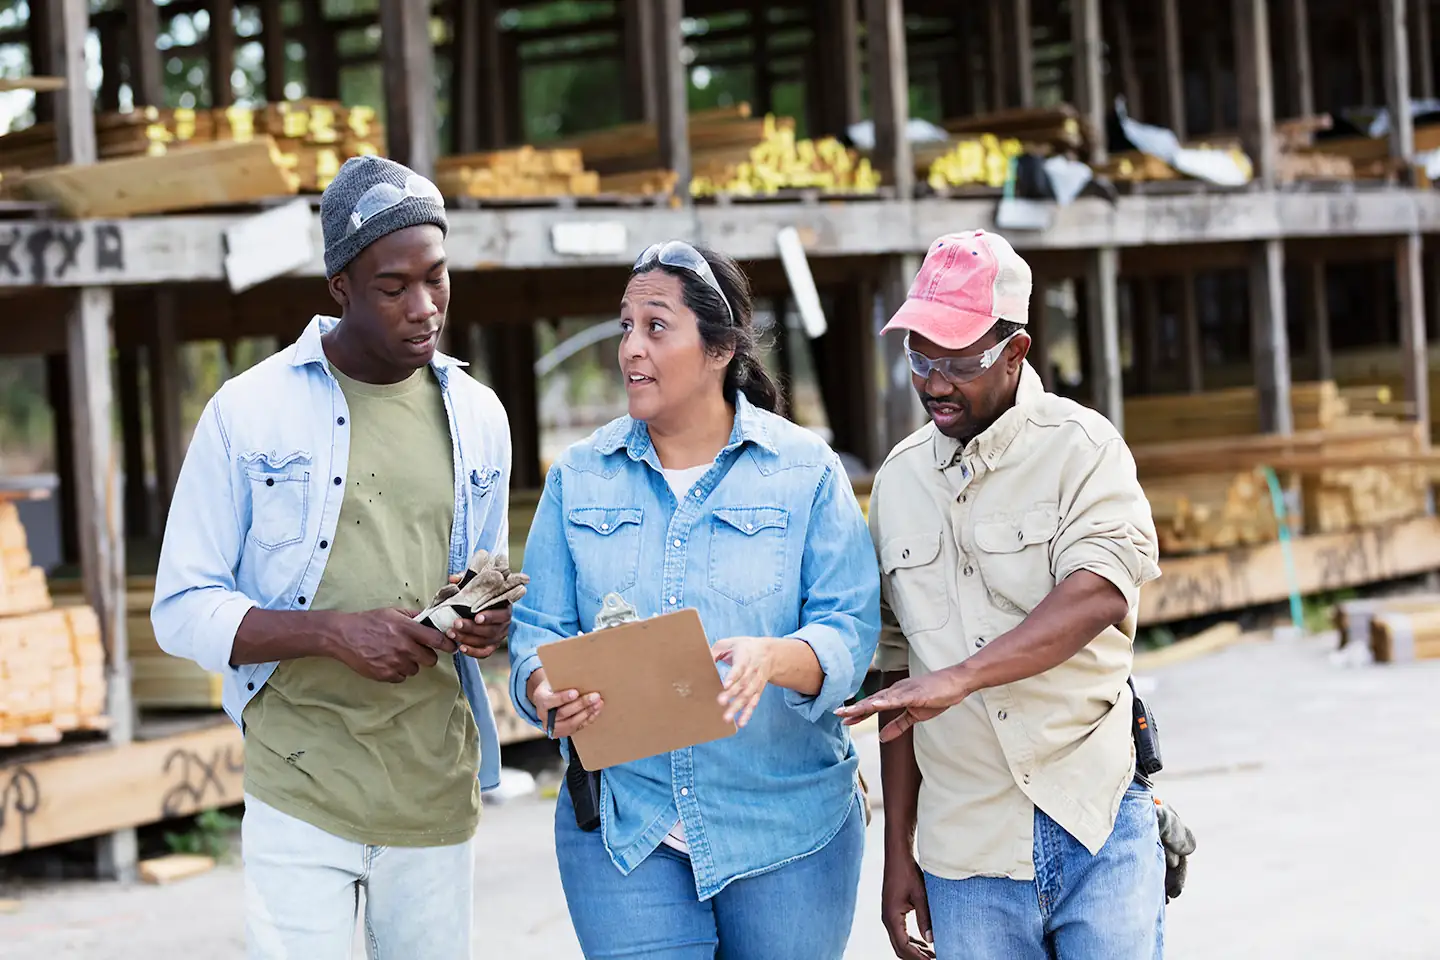 A multiracial group of three people work in a lumberyard. The manager is a Hispanic woman who is holding a clipboard. She is in the middle, looking toward a younger Black man, talking and smiling as he looks down at the clipboard.